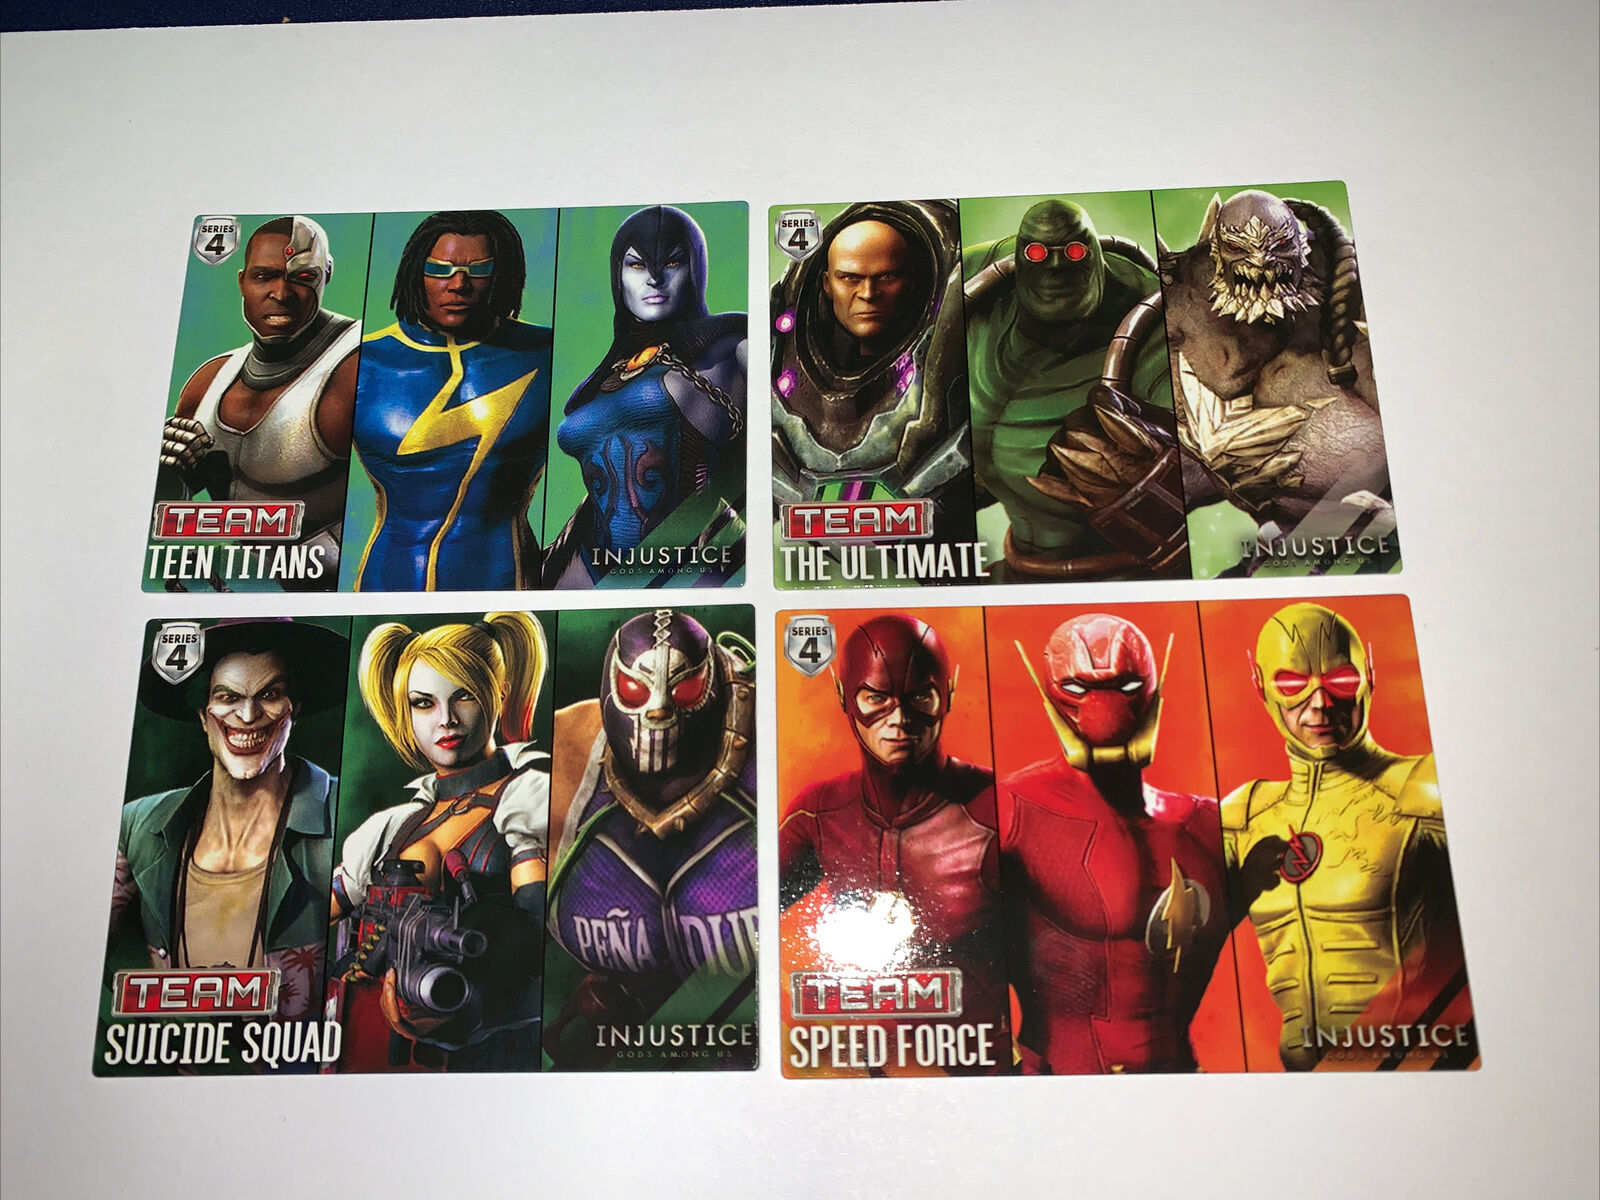 Injustice Gods Among Us Arcade, Team Cards Suicide Squad, Speed Force +2